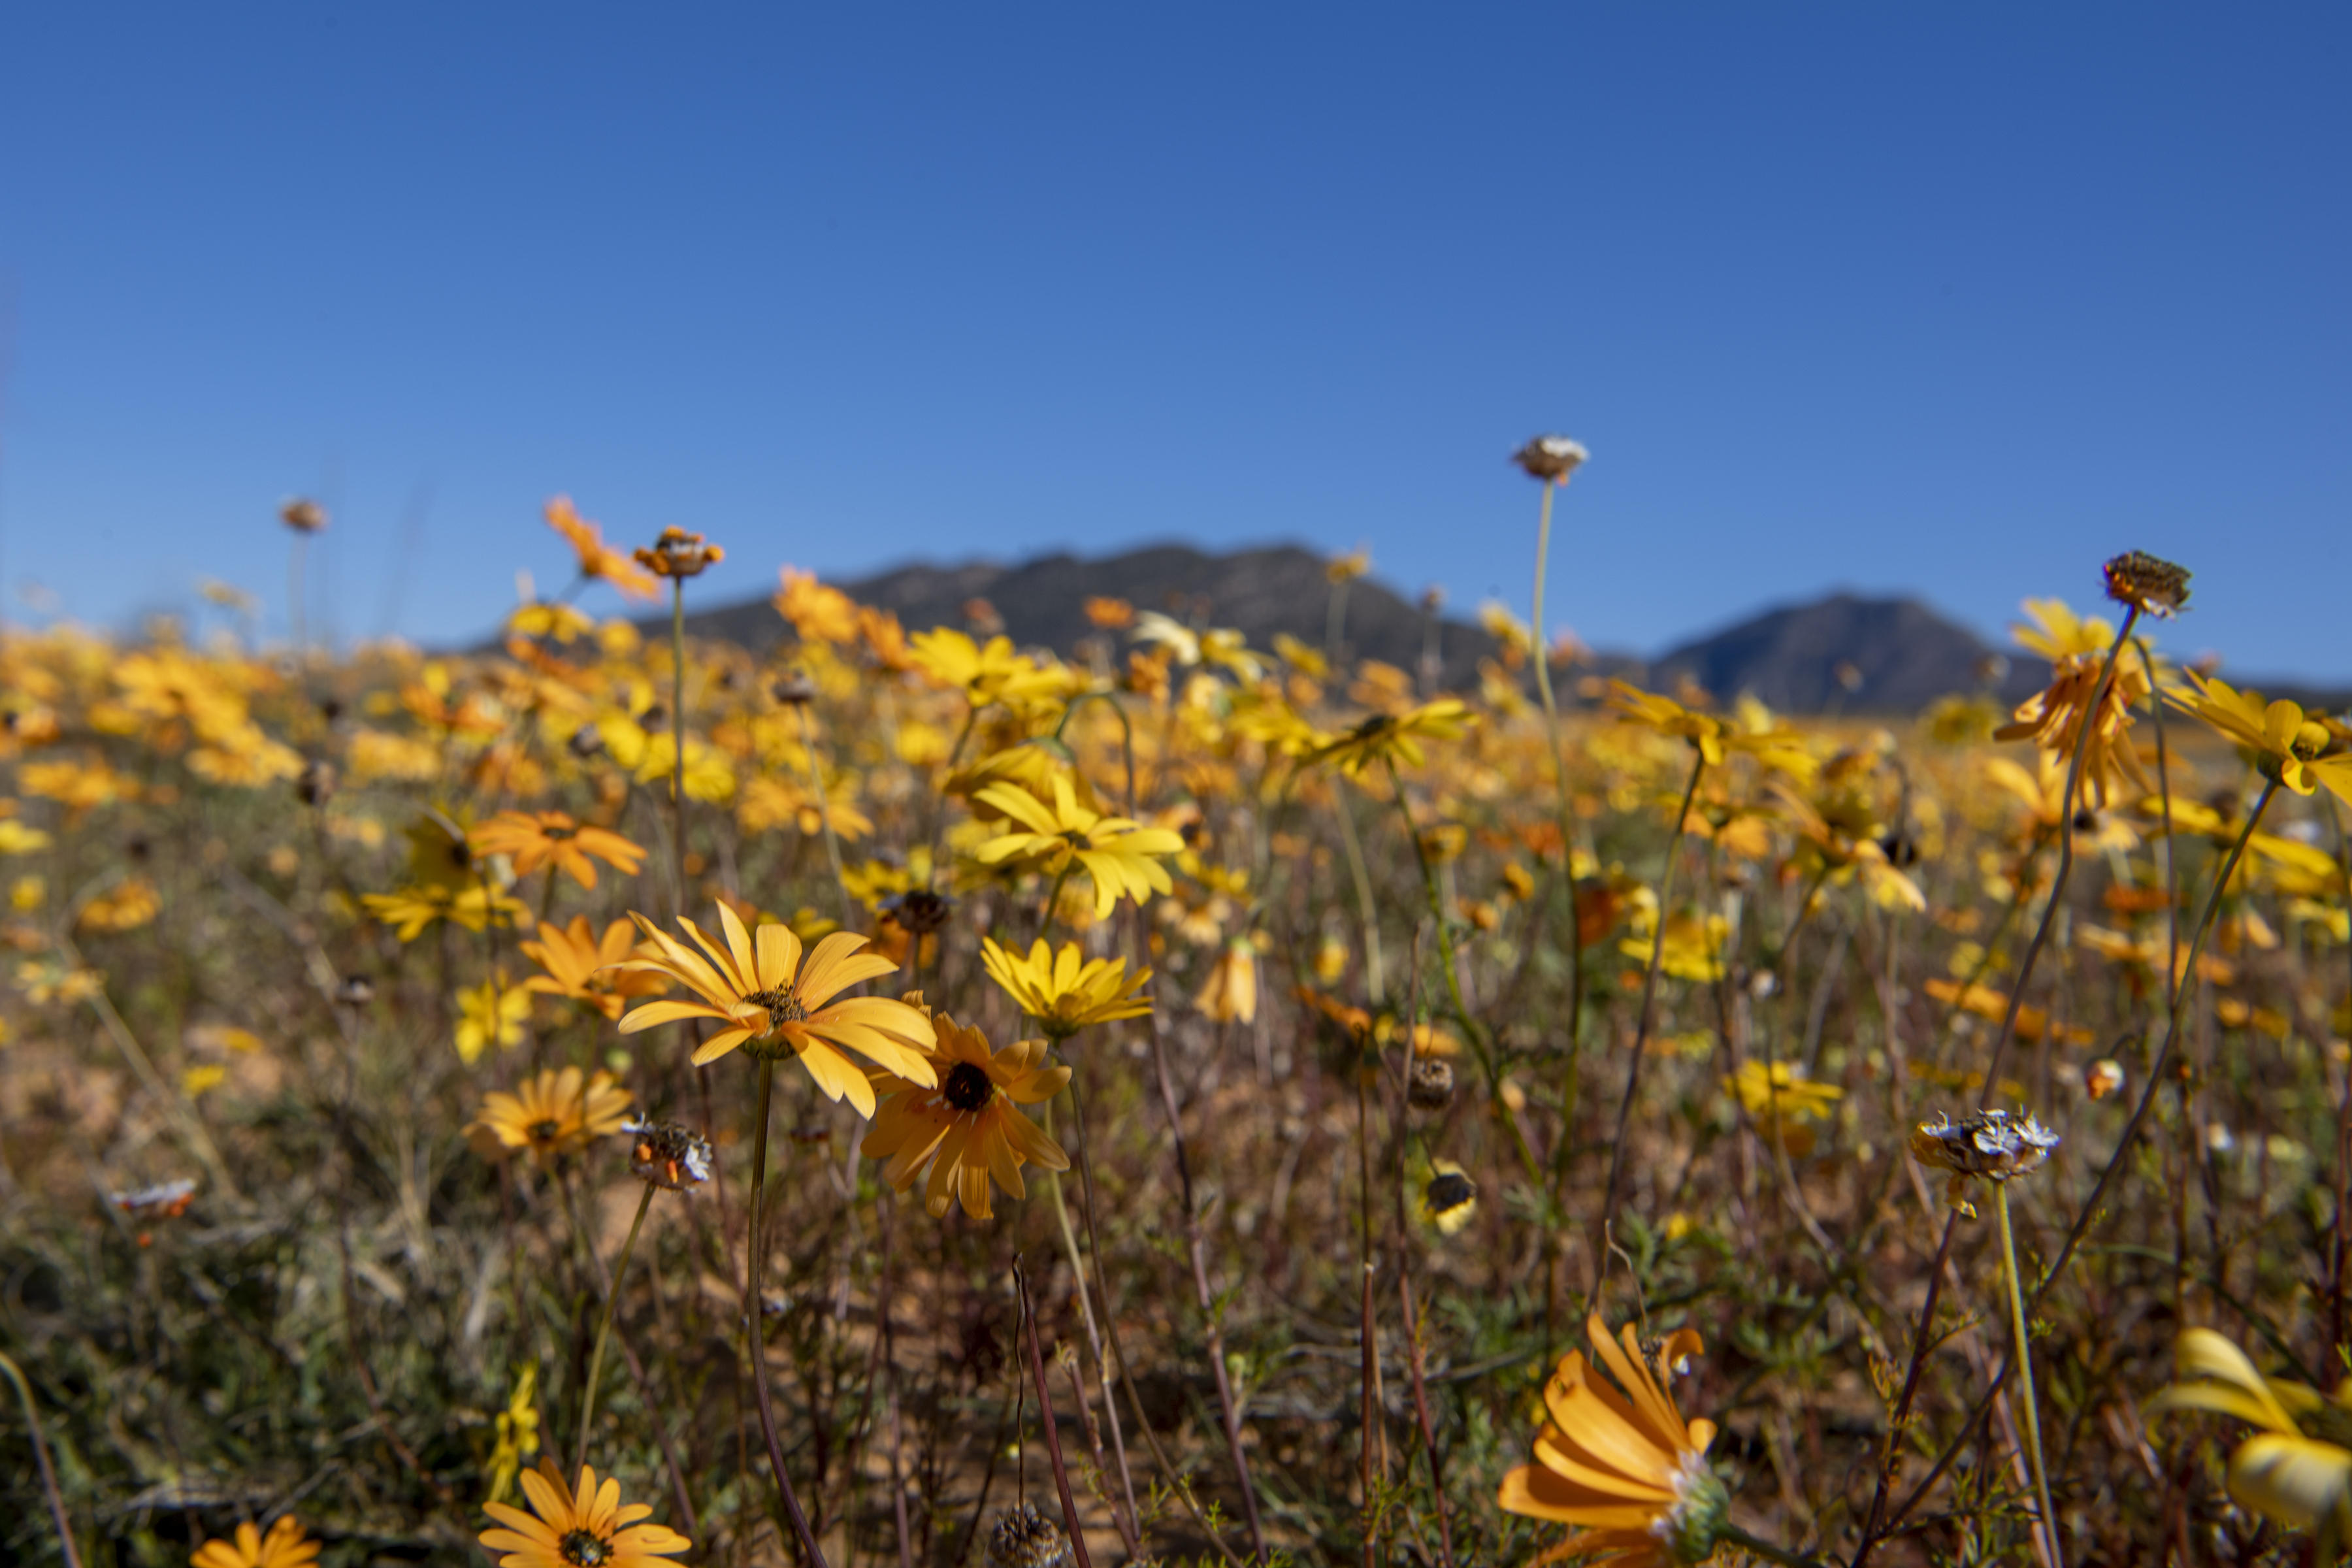 The semi-dessert wilderness, boasts brightly coloured daisies spread like carpet as the Spring season begins.